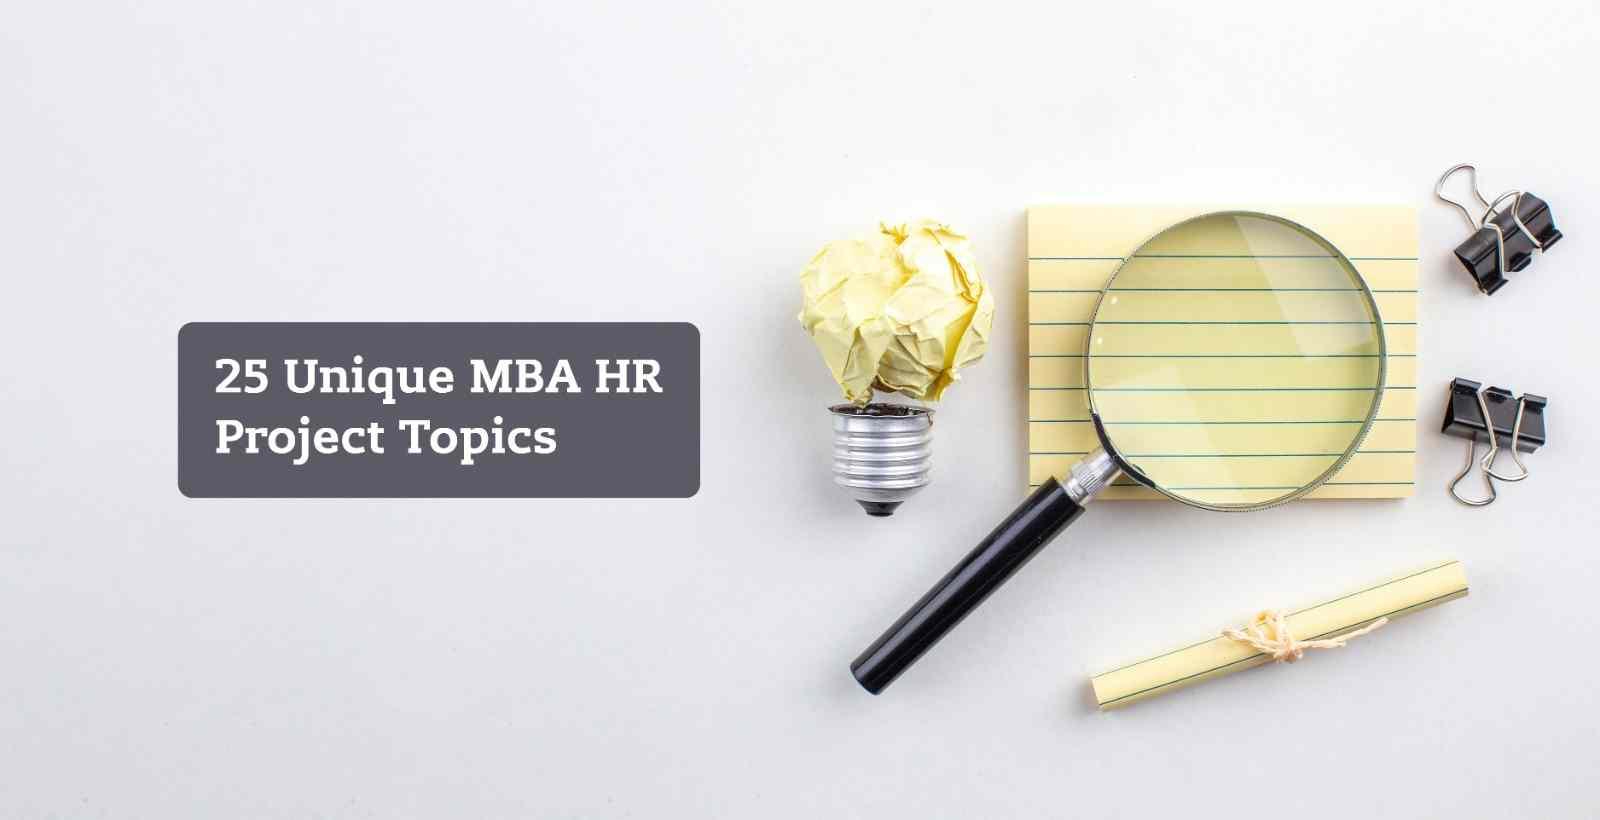 25 Unique MBA HR Project Topics That Will Set You Apart